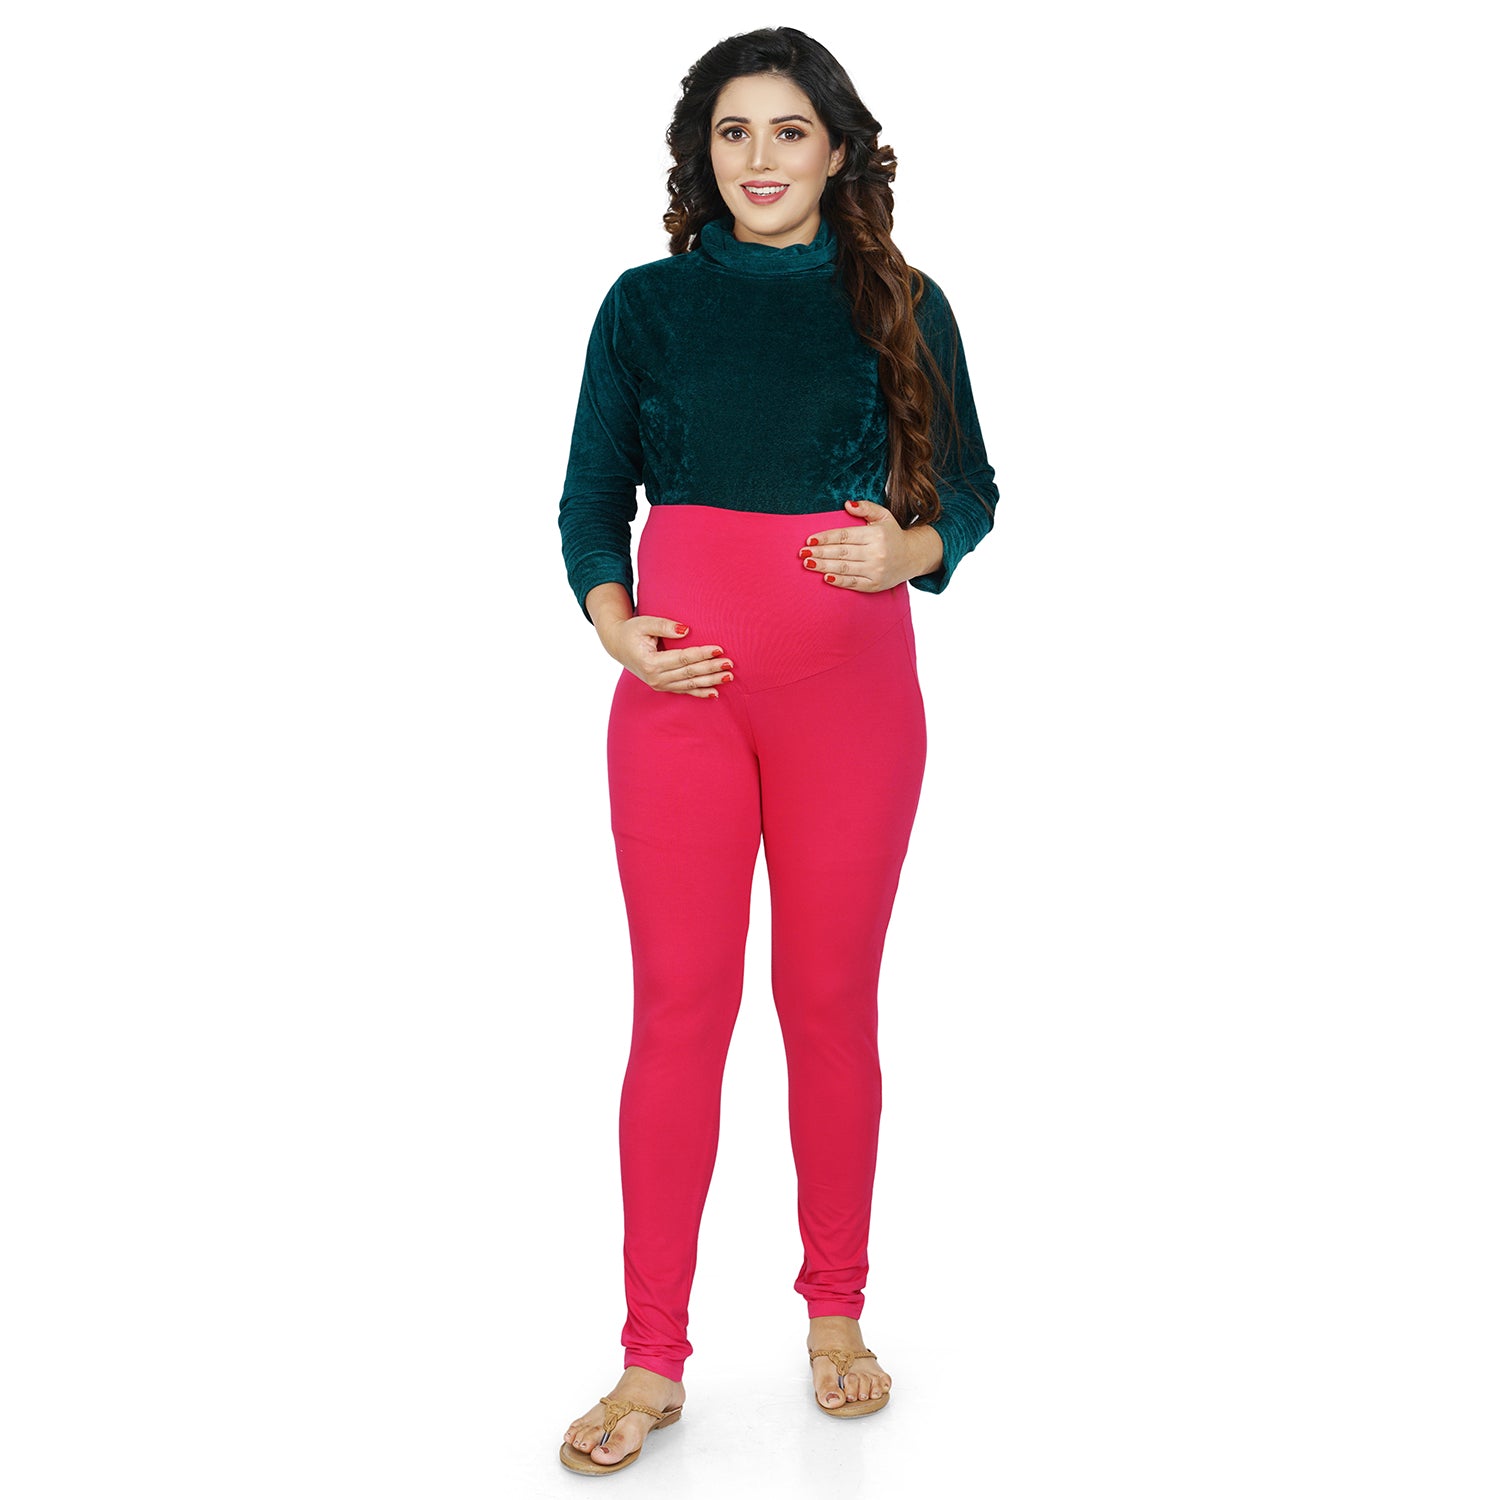 Baby Moo Soft And Comfy Full Length Maternity Leggings Solid - Pink